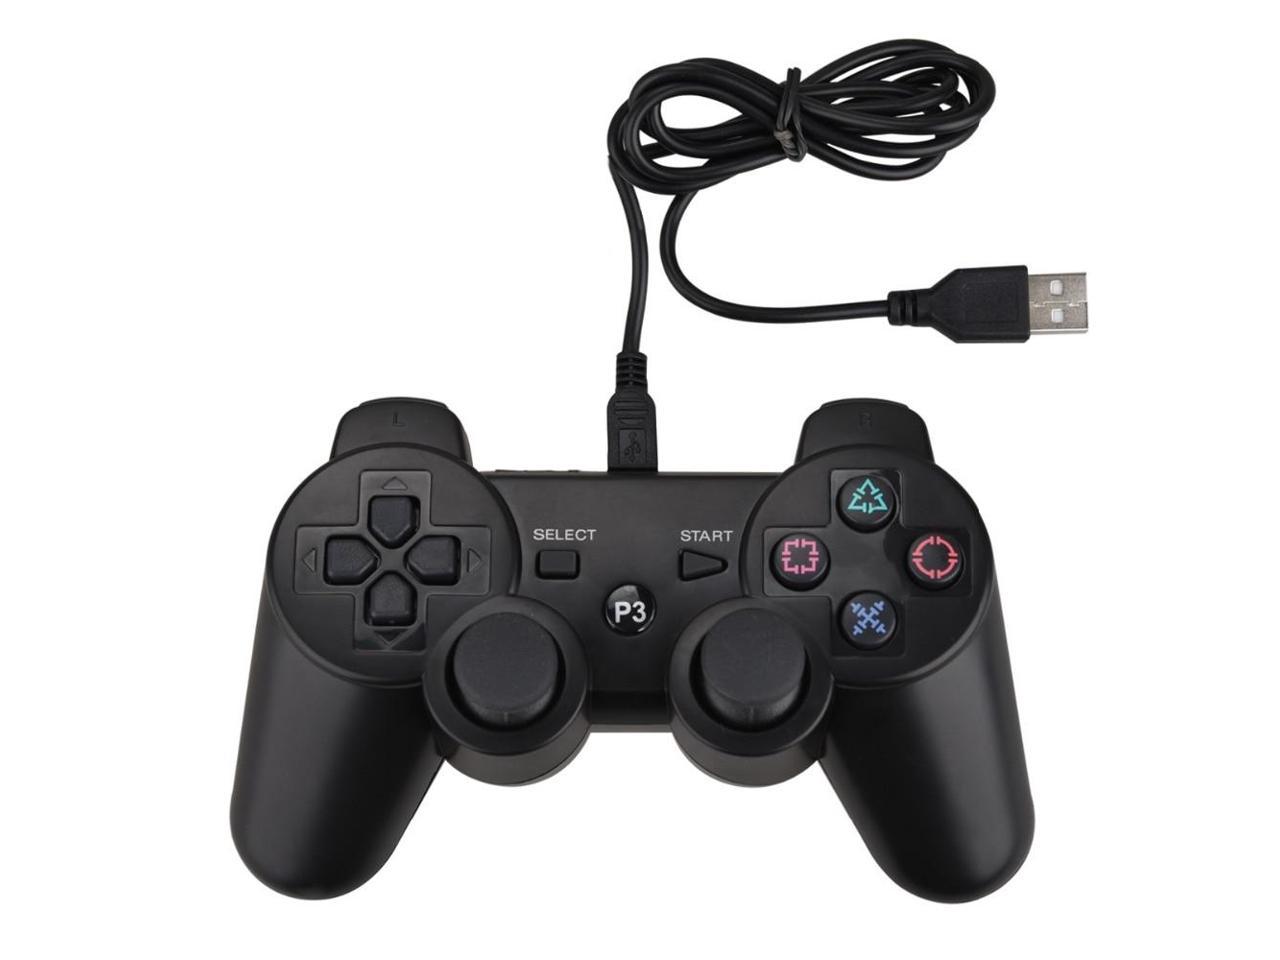 For PS3 USB Wired Gamepad Controller Playstation 3 Console For PS3 For Dualshock Gamepad Joystick USB Wired Gamepad